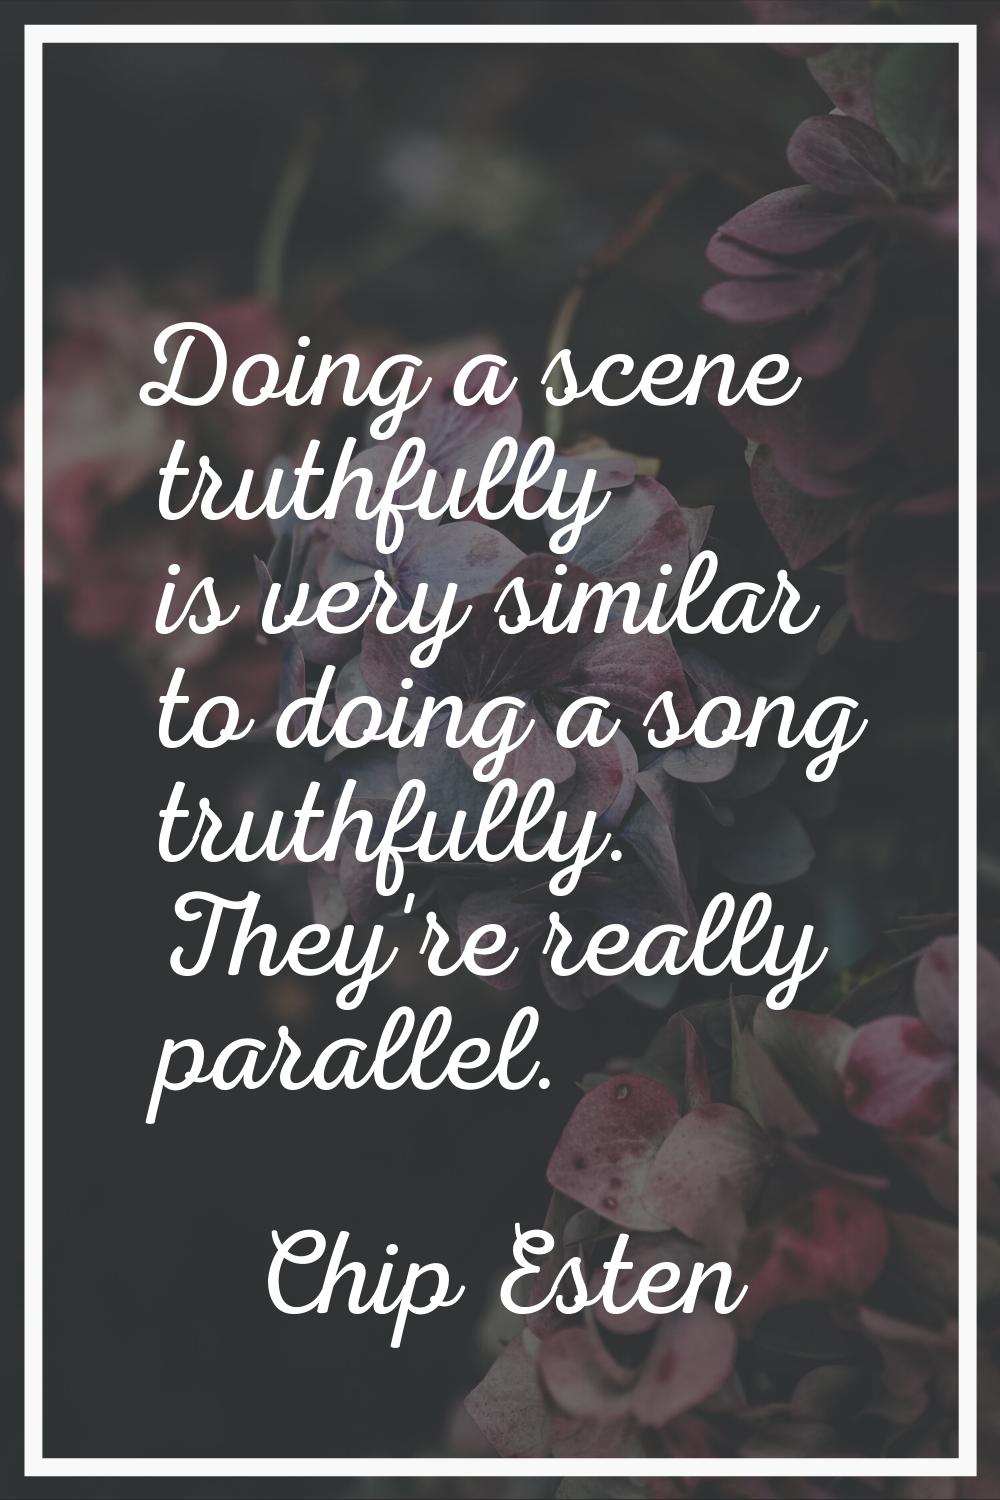 Doing a scene truthfully is very similar to doing a song truthfully. They're really parallel.